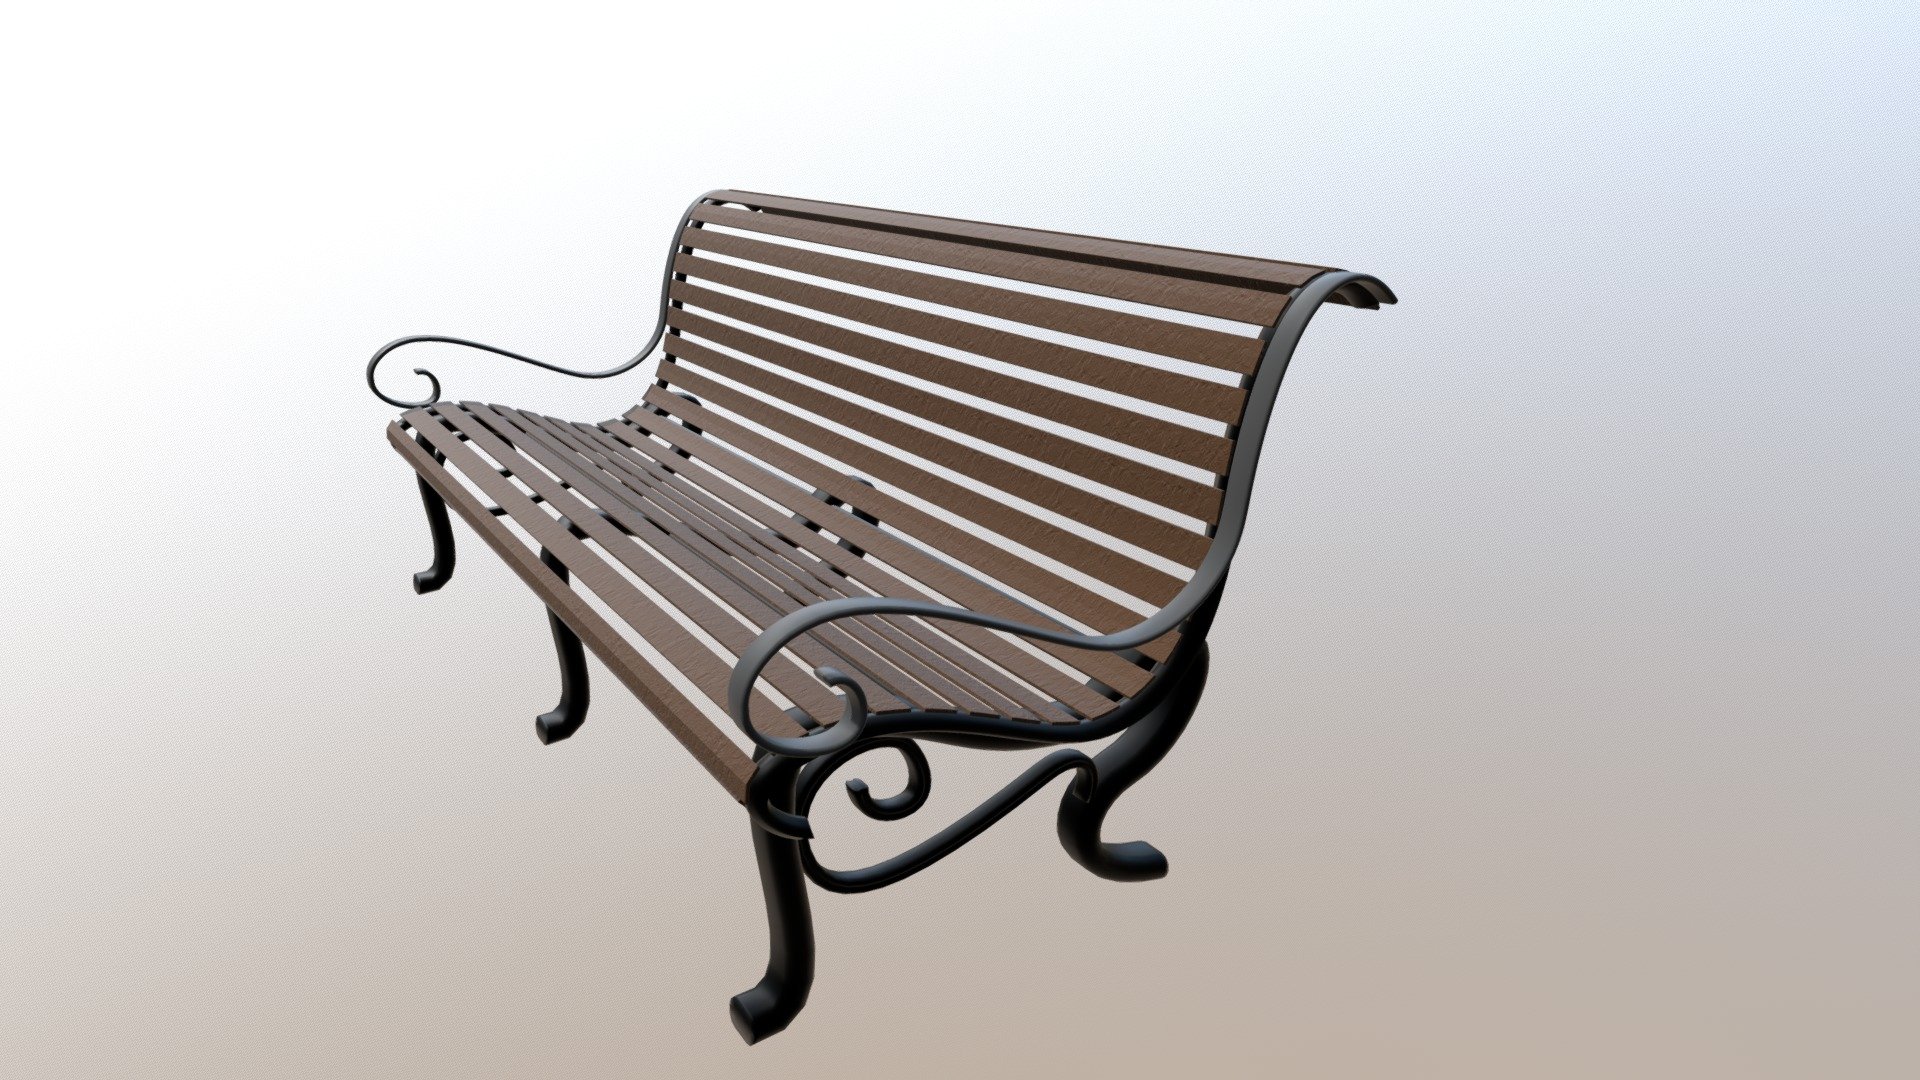 A wooden bench that was used on the Titanic for sitting around the promenade. The model is suitable for static renders, props and environment shots - RMS Titanic Wooden Bench - 3D model by culerdamage (@oladoto) 3d model